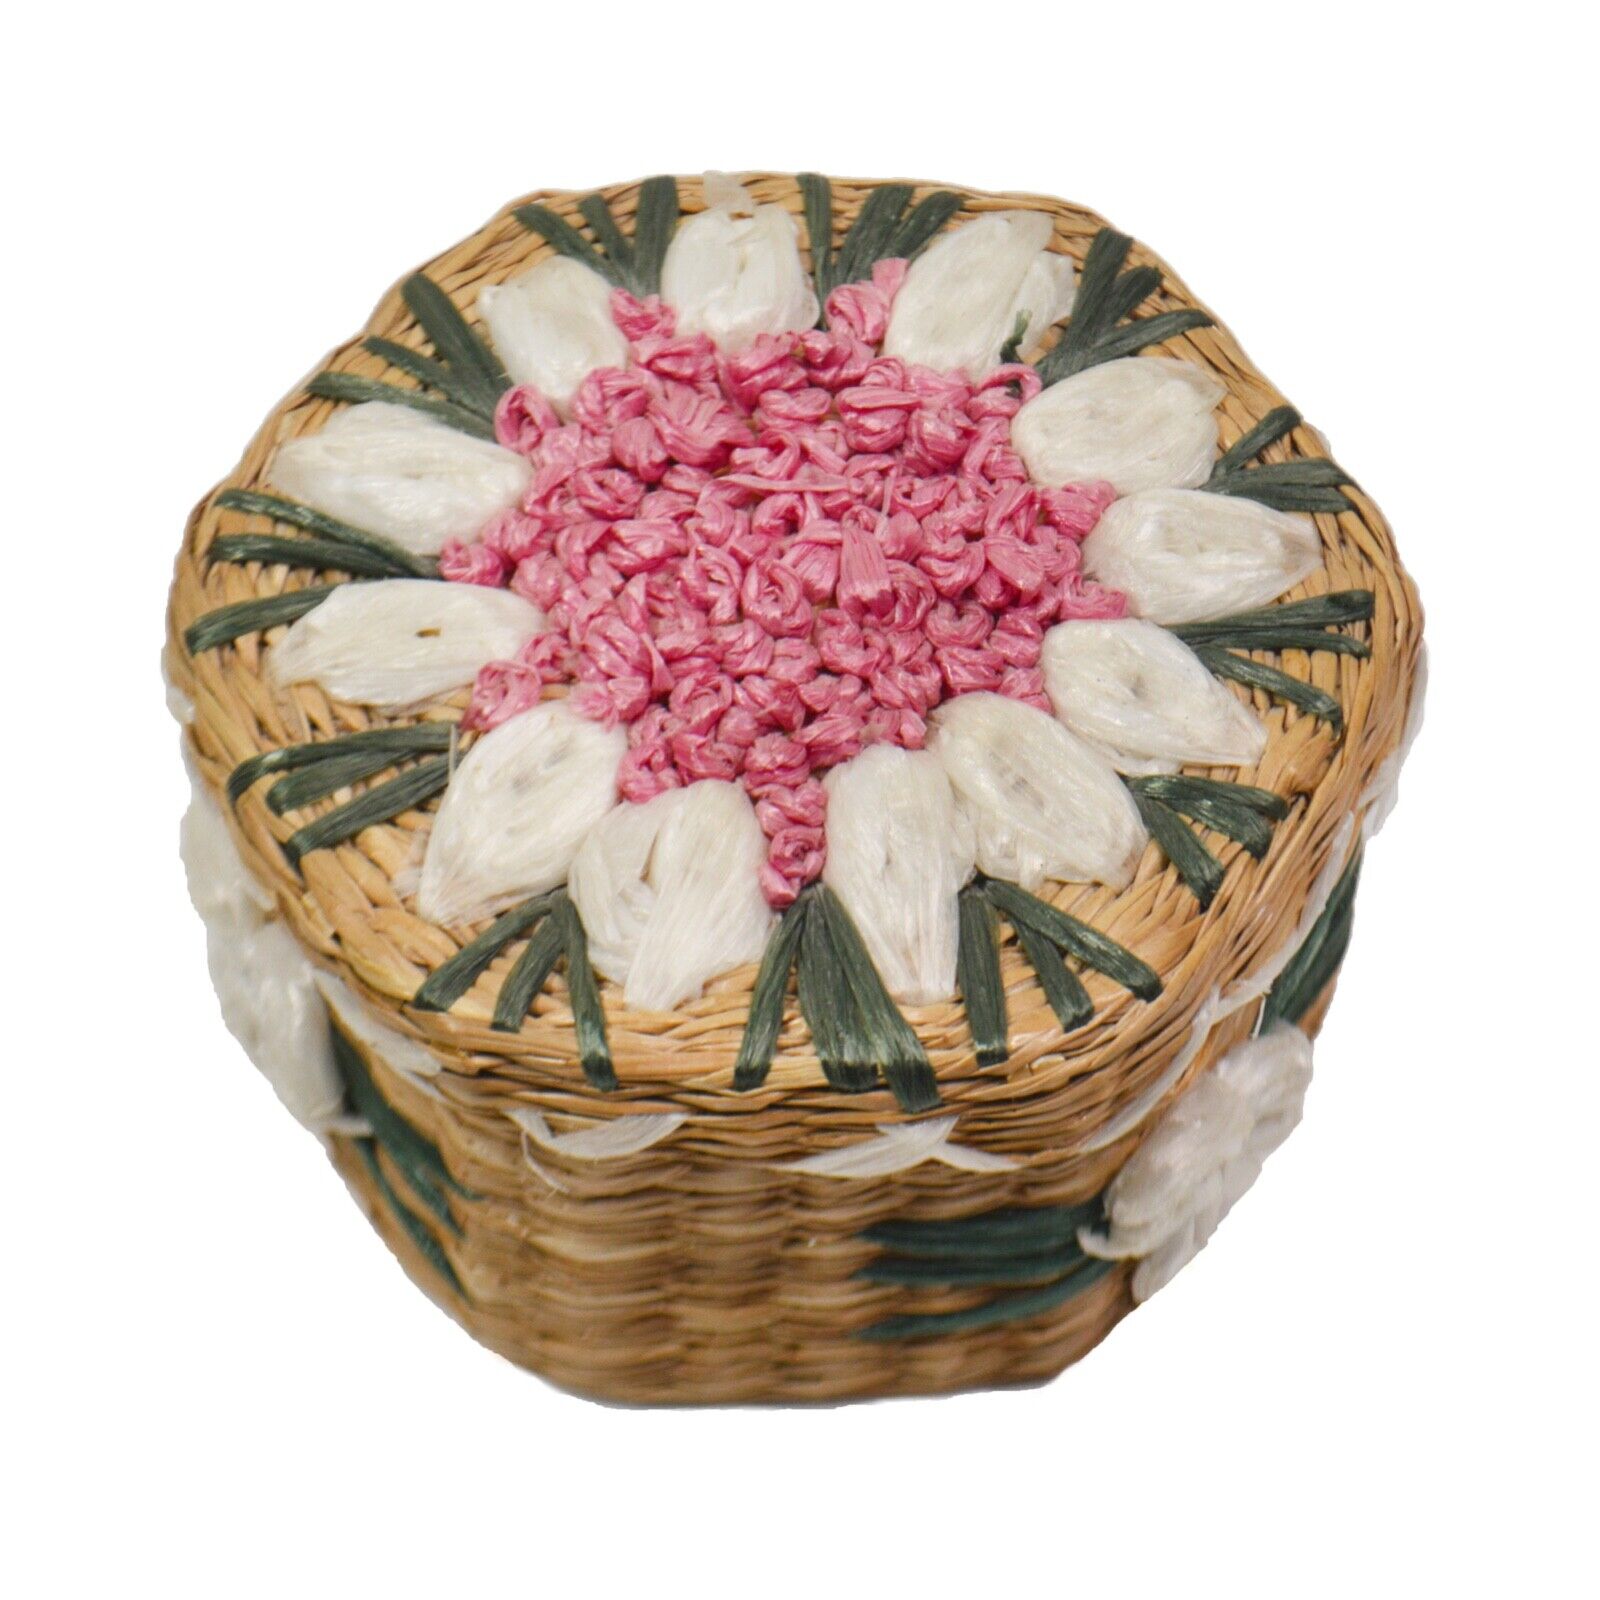 VTG Woven Natural Straw Basket Lid Embroidered Pink White Raffia Flowers Hexagon